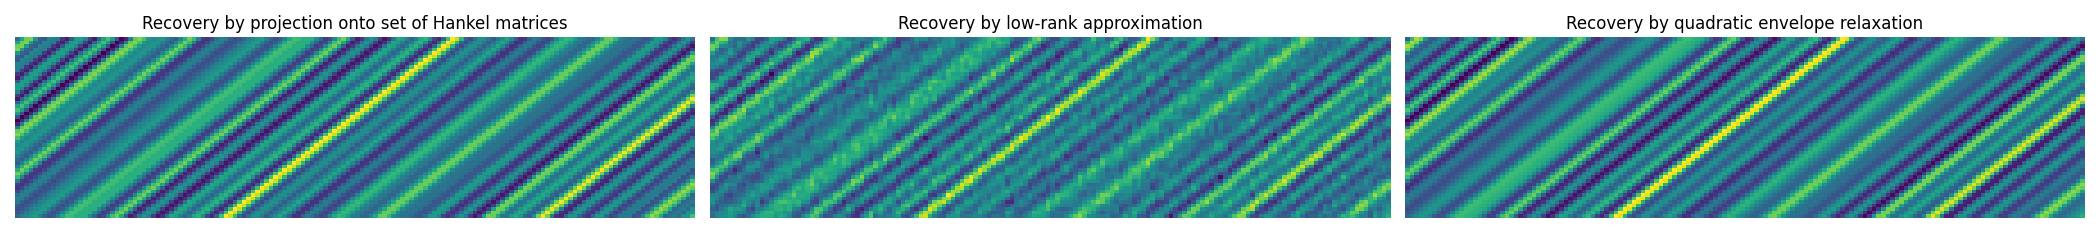 Recovery by projection onto set of Hankel matrices, Recovery by low-rank approximation, Recovery by quadratic envelope relaxation